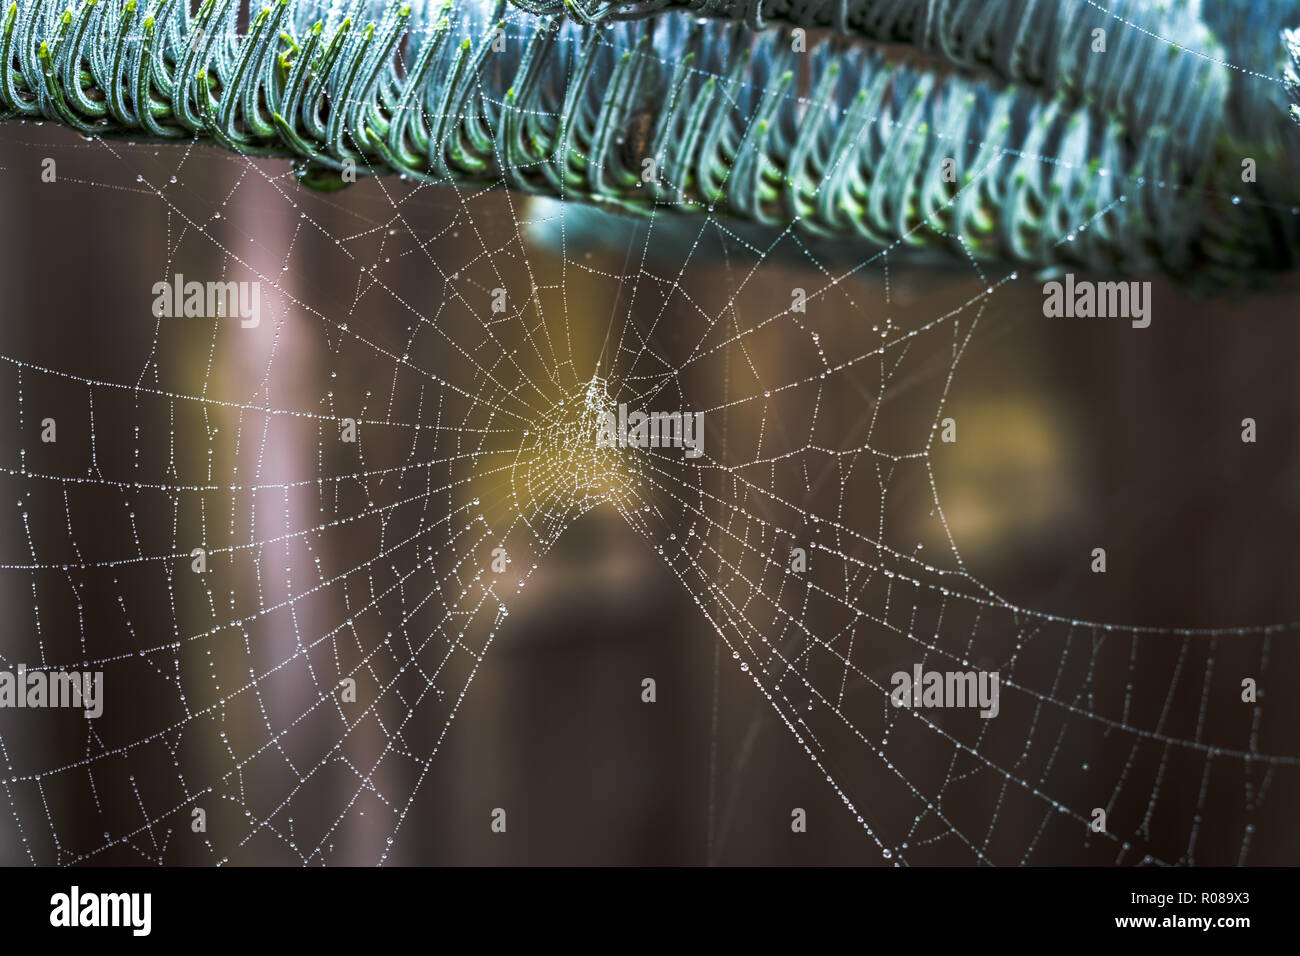 A spiderweb with tiny droplets Stock Photo